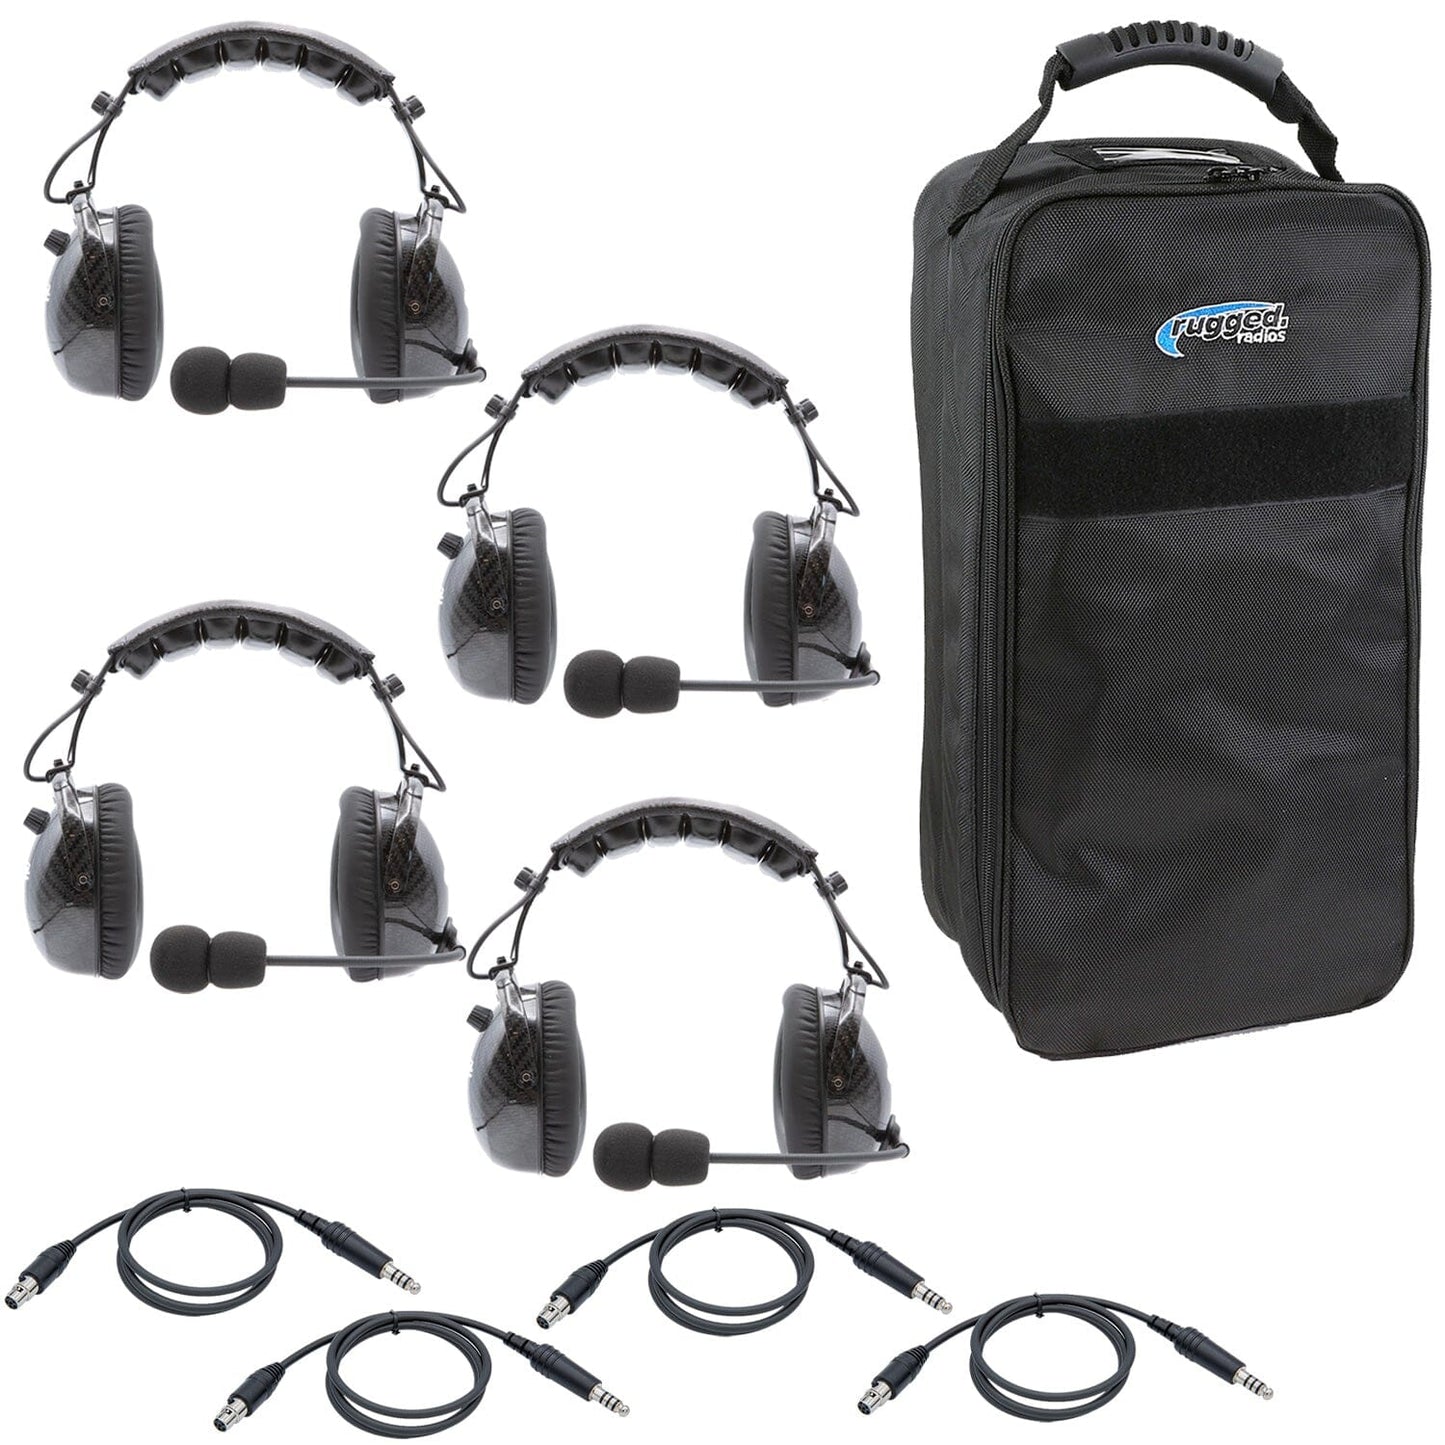 Rugged Radios AlphaBass Intercom Headset with OFFROAD 4C wired Cable - BUNDLE with 4 Headsets and Headset Bag